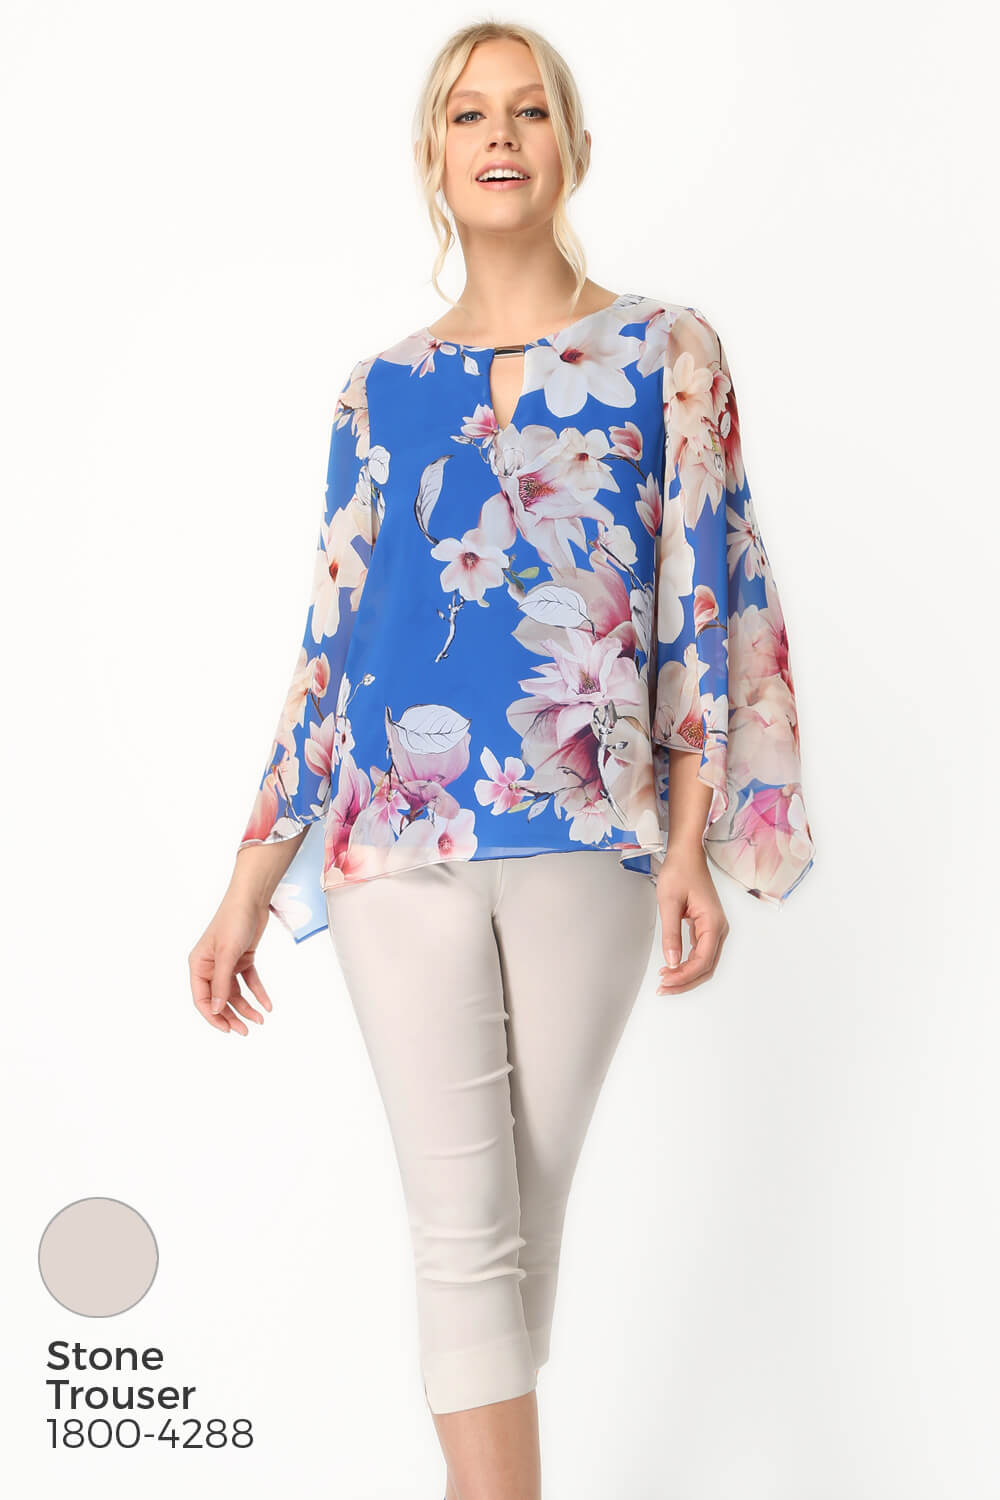 Royal Blue Floral Chiffon Overlay Top, Image 7 of 8